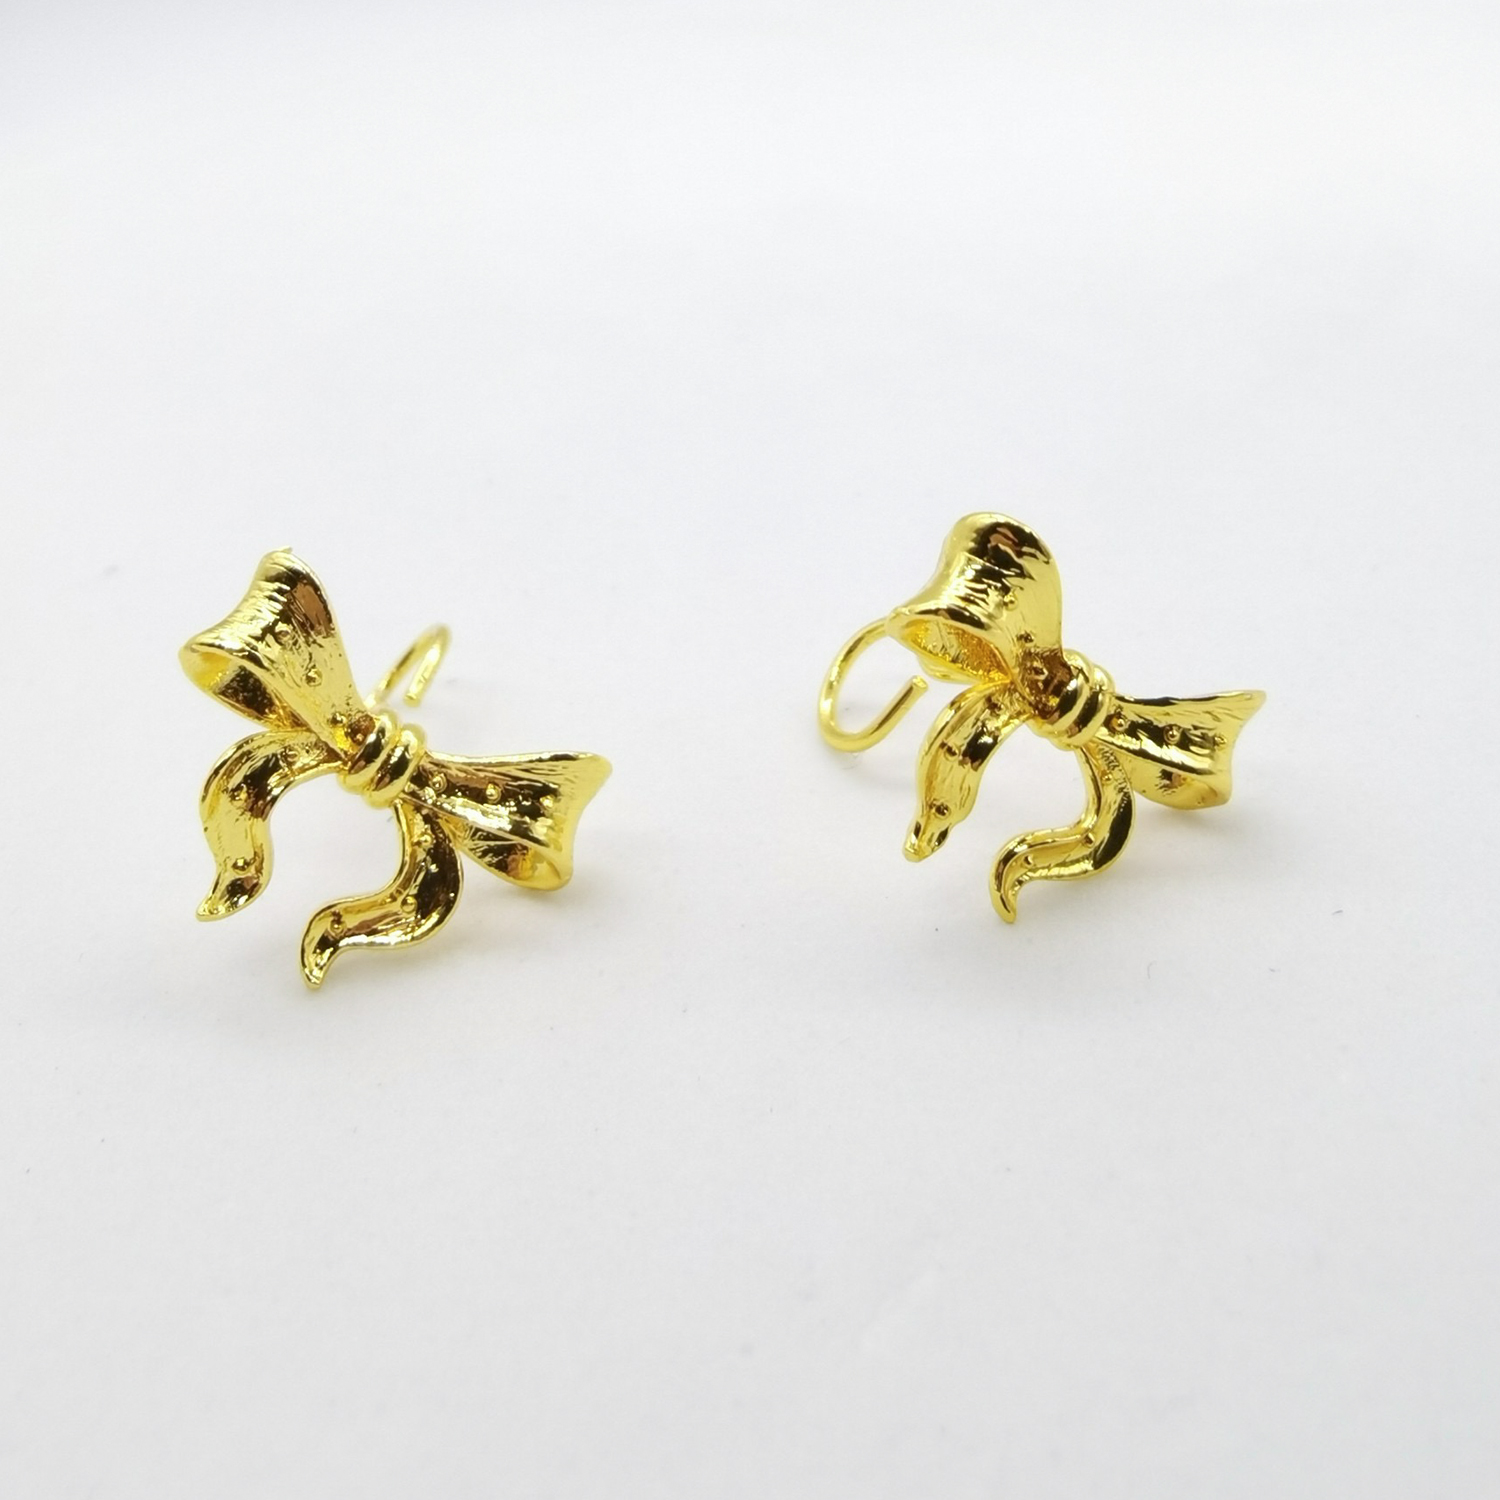 Alluvial gold vacuum electroplating 24K gold fugitive princess butterfly earrings